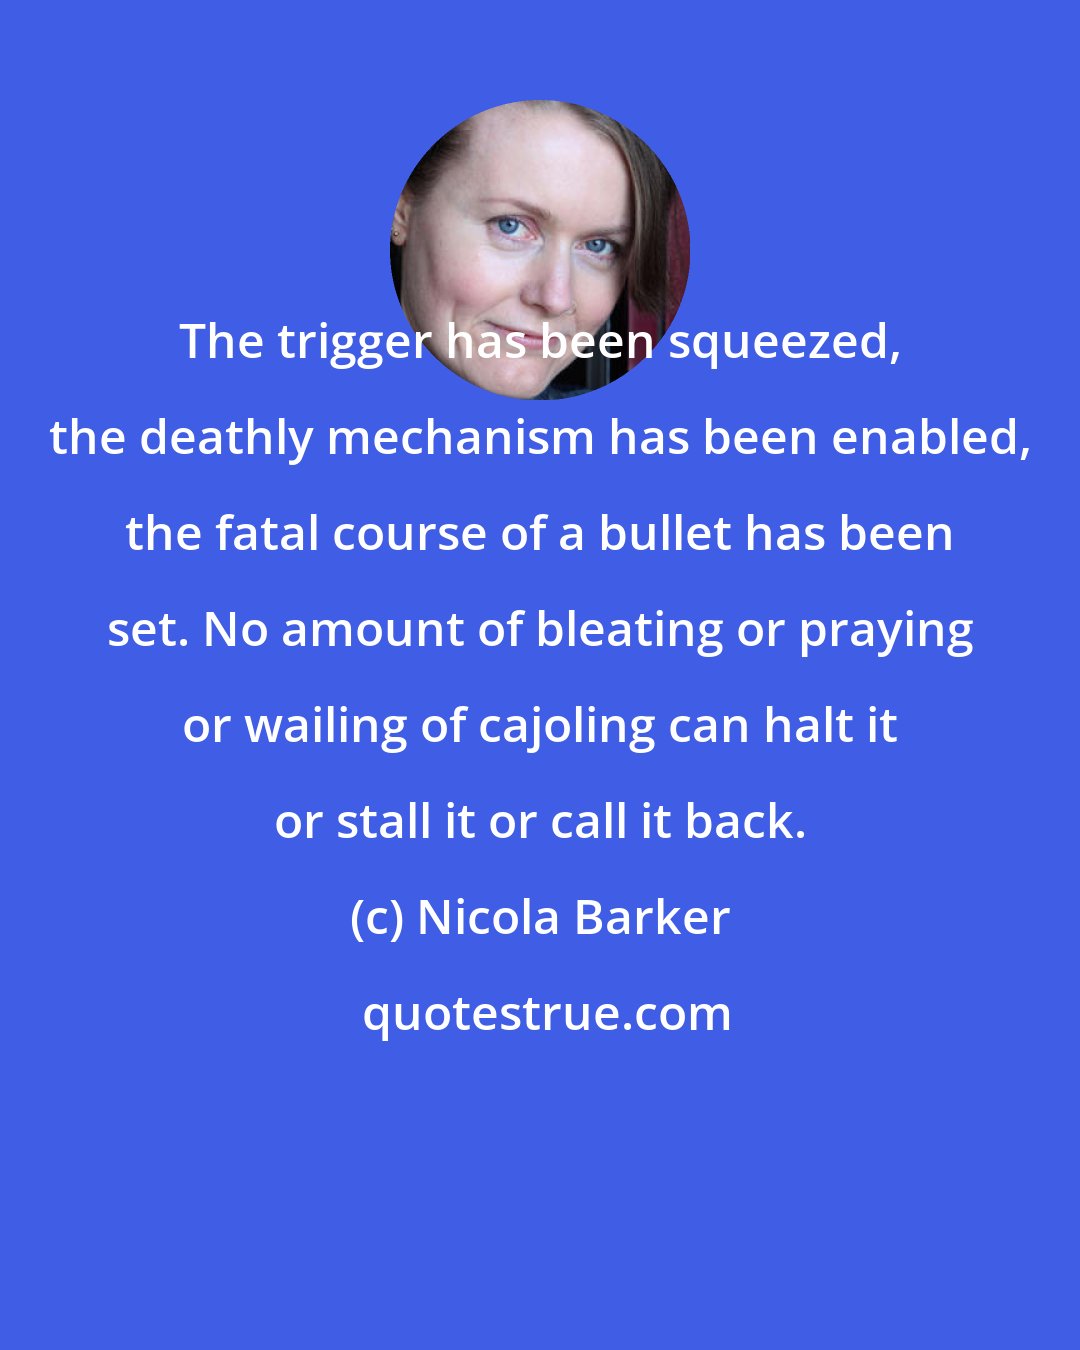 Nicola Barker: The trigger has been squeezed, the deathly mechanism has been enabled, the fatal course of a bullet has been set. No amount of bleating or praying or wailing of cajoling can halt it or stall it or call it back.